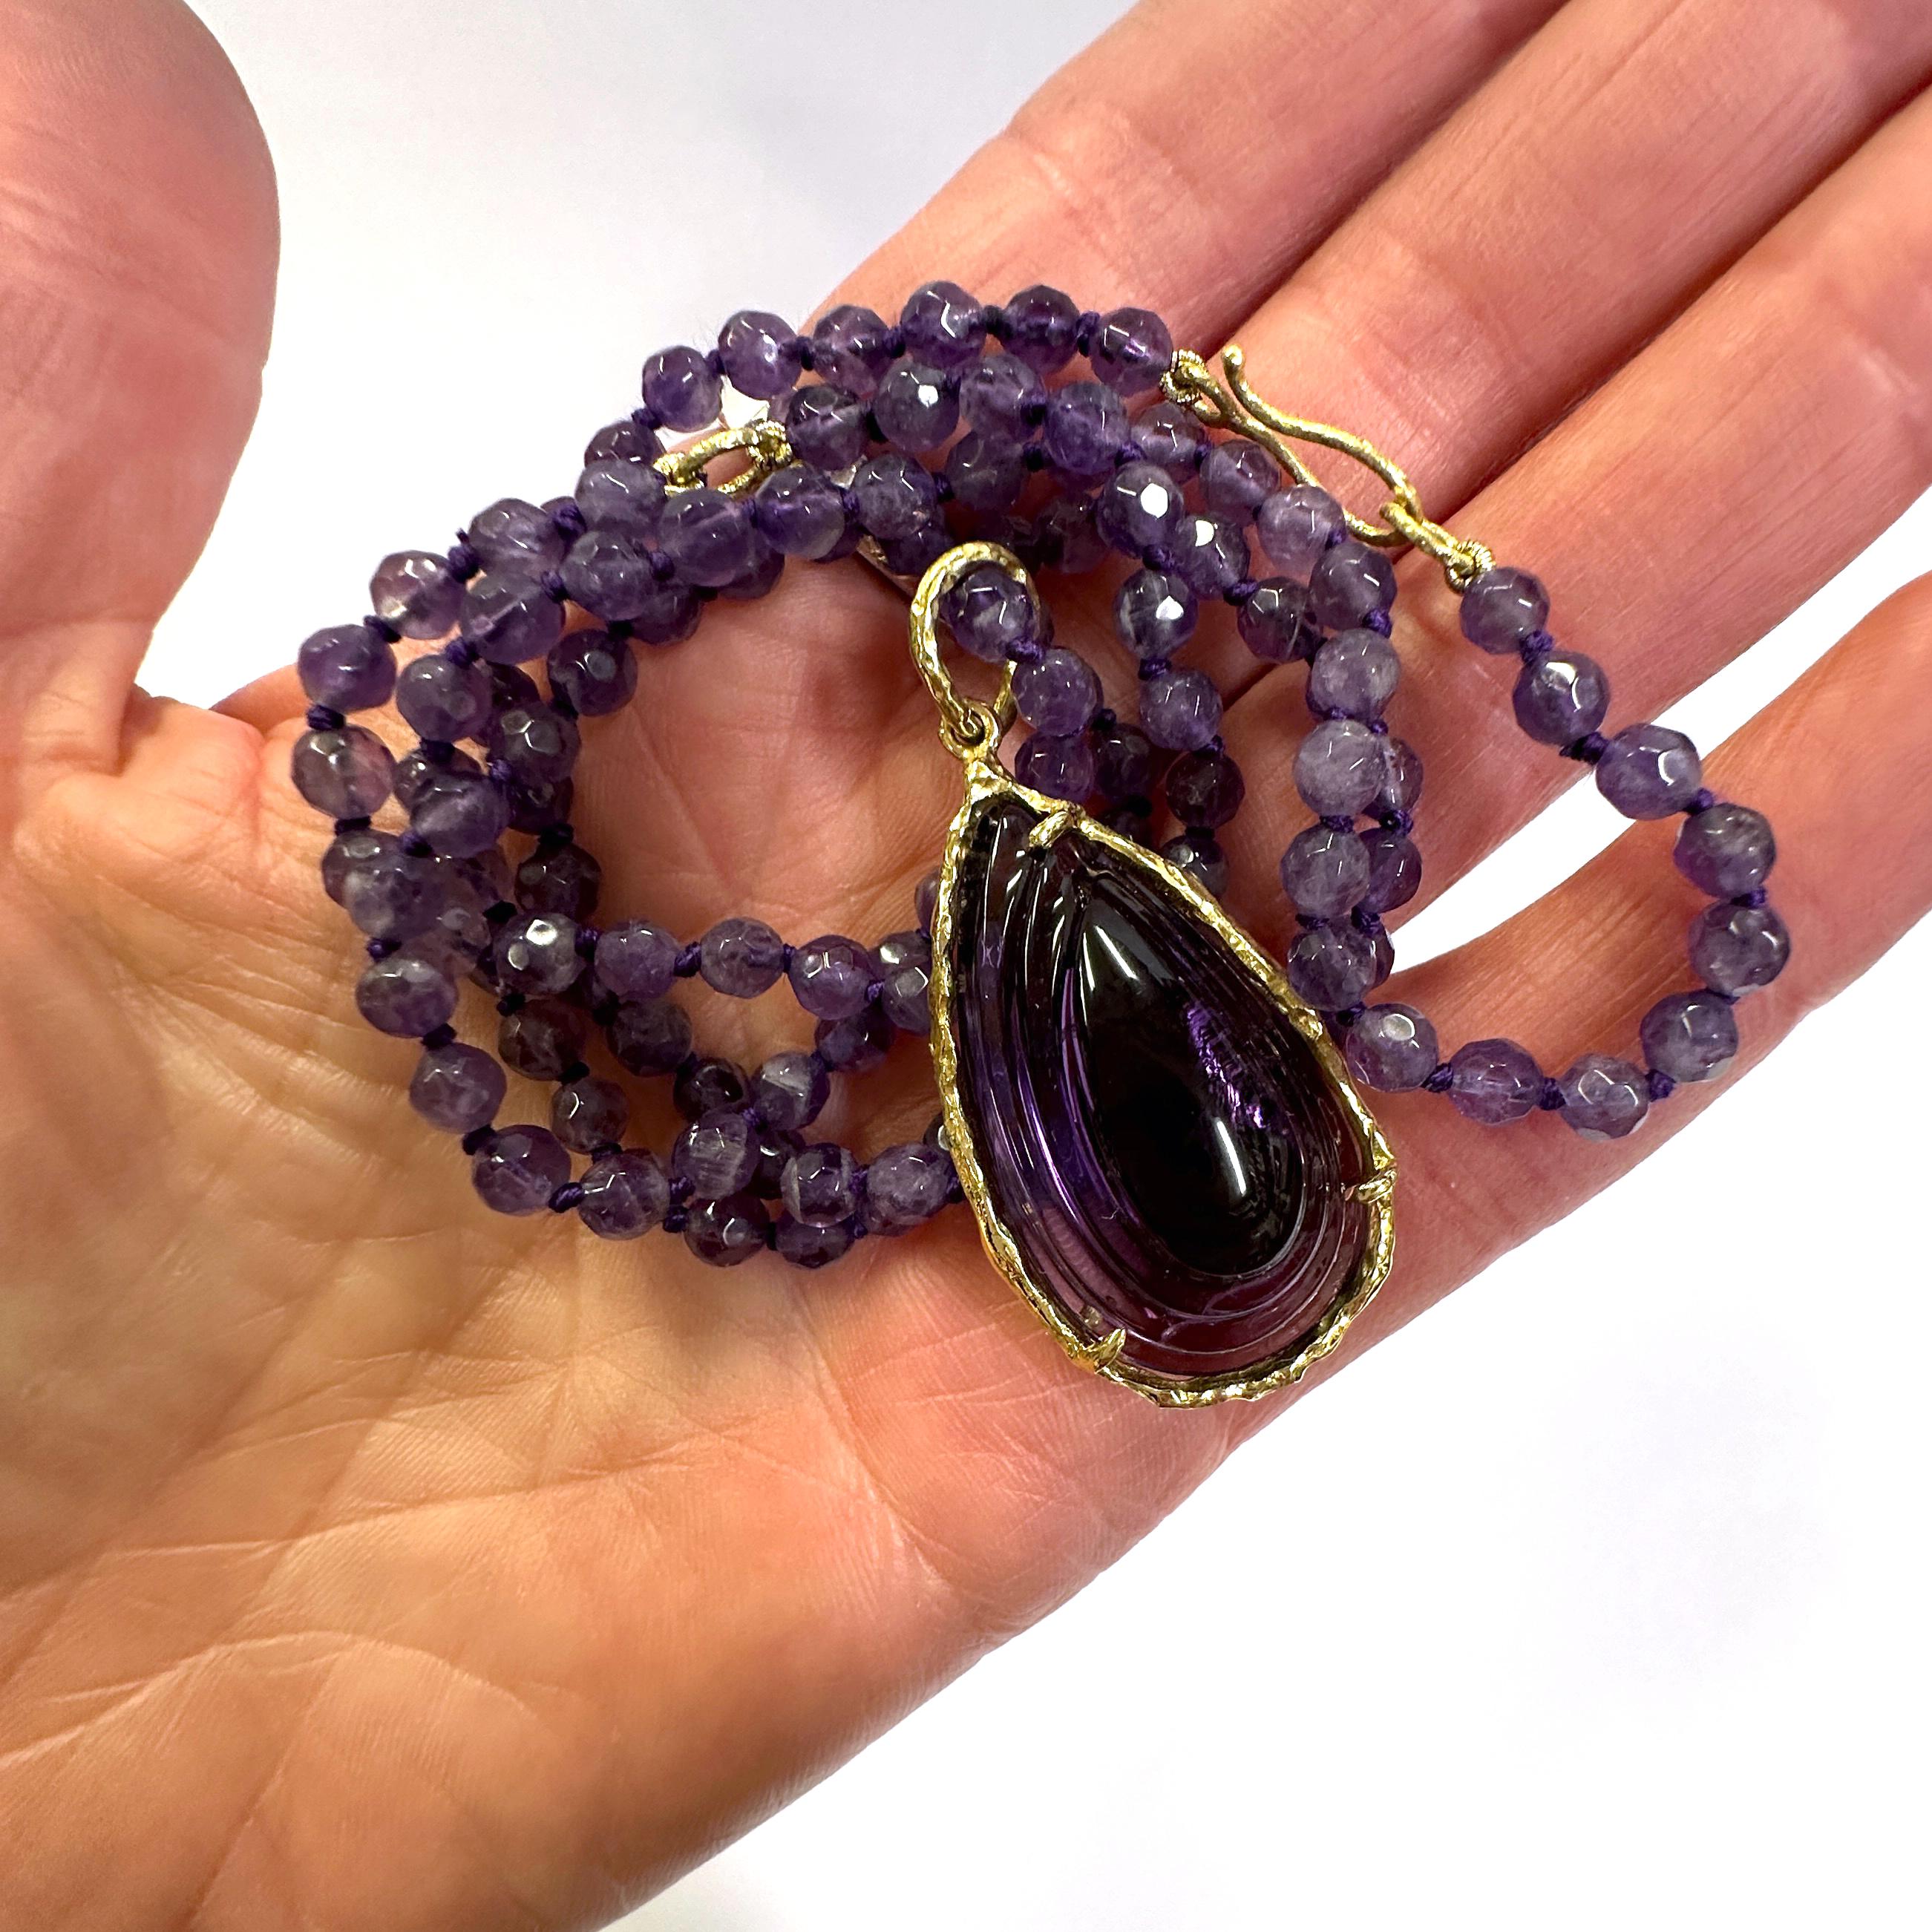 39 Carat Carved Amethyst Pendant in 18K Gold on Convertible Amethyst Bead Chain For Sale 8